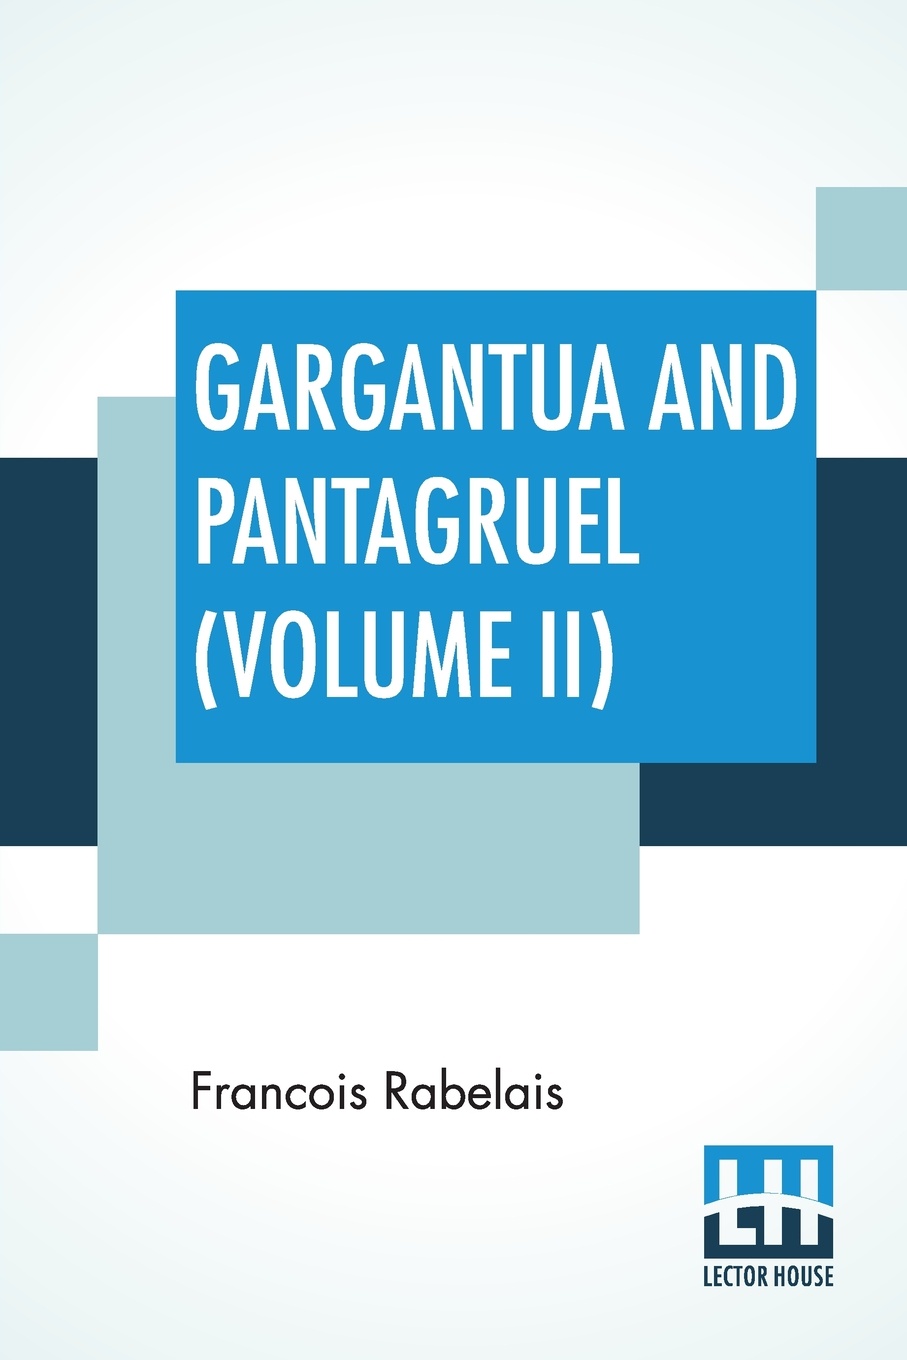 Gargantua And Pantagruel (Volume II). Five Books Of The Lives, Heroic Deeds And Sayings Of Gargantua And His Son Pantagruel, Translated Into English By Sir Thomas Urquhart Of Cromarty And Peter Antony Motteux